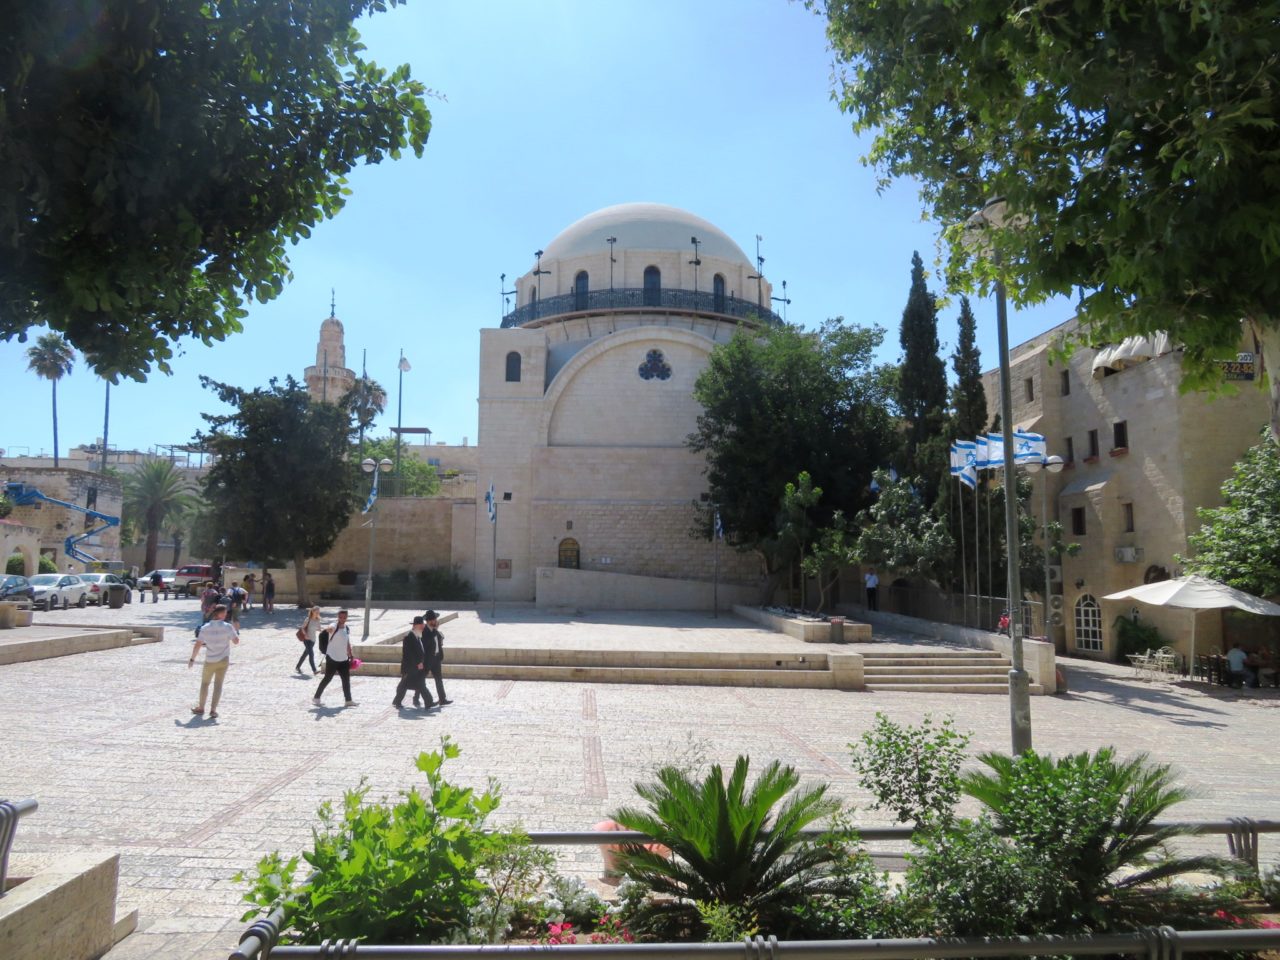 The joys of walking Jerusalem - The Hurva Synagogue in the main square of the Jewish Quarter of the Old City